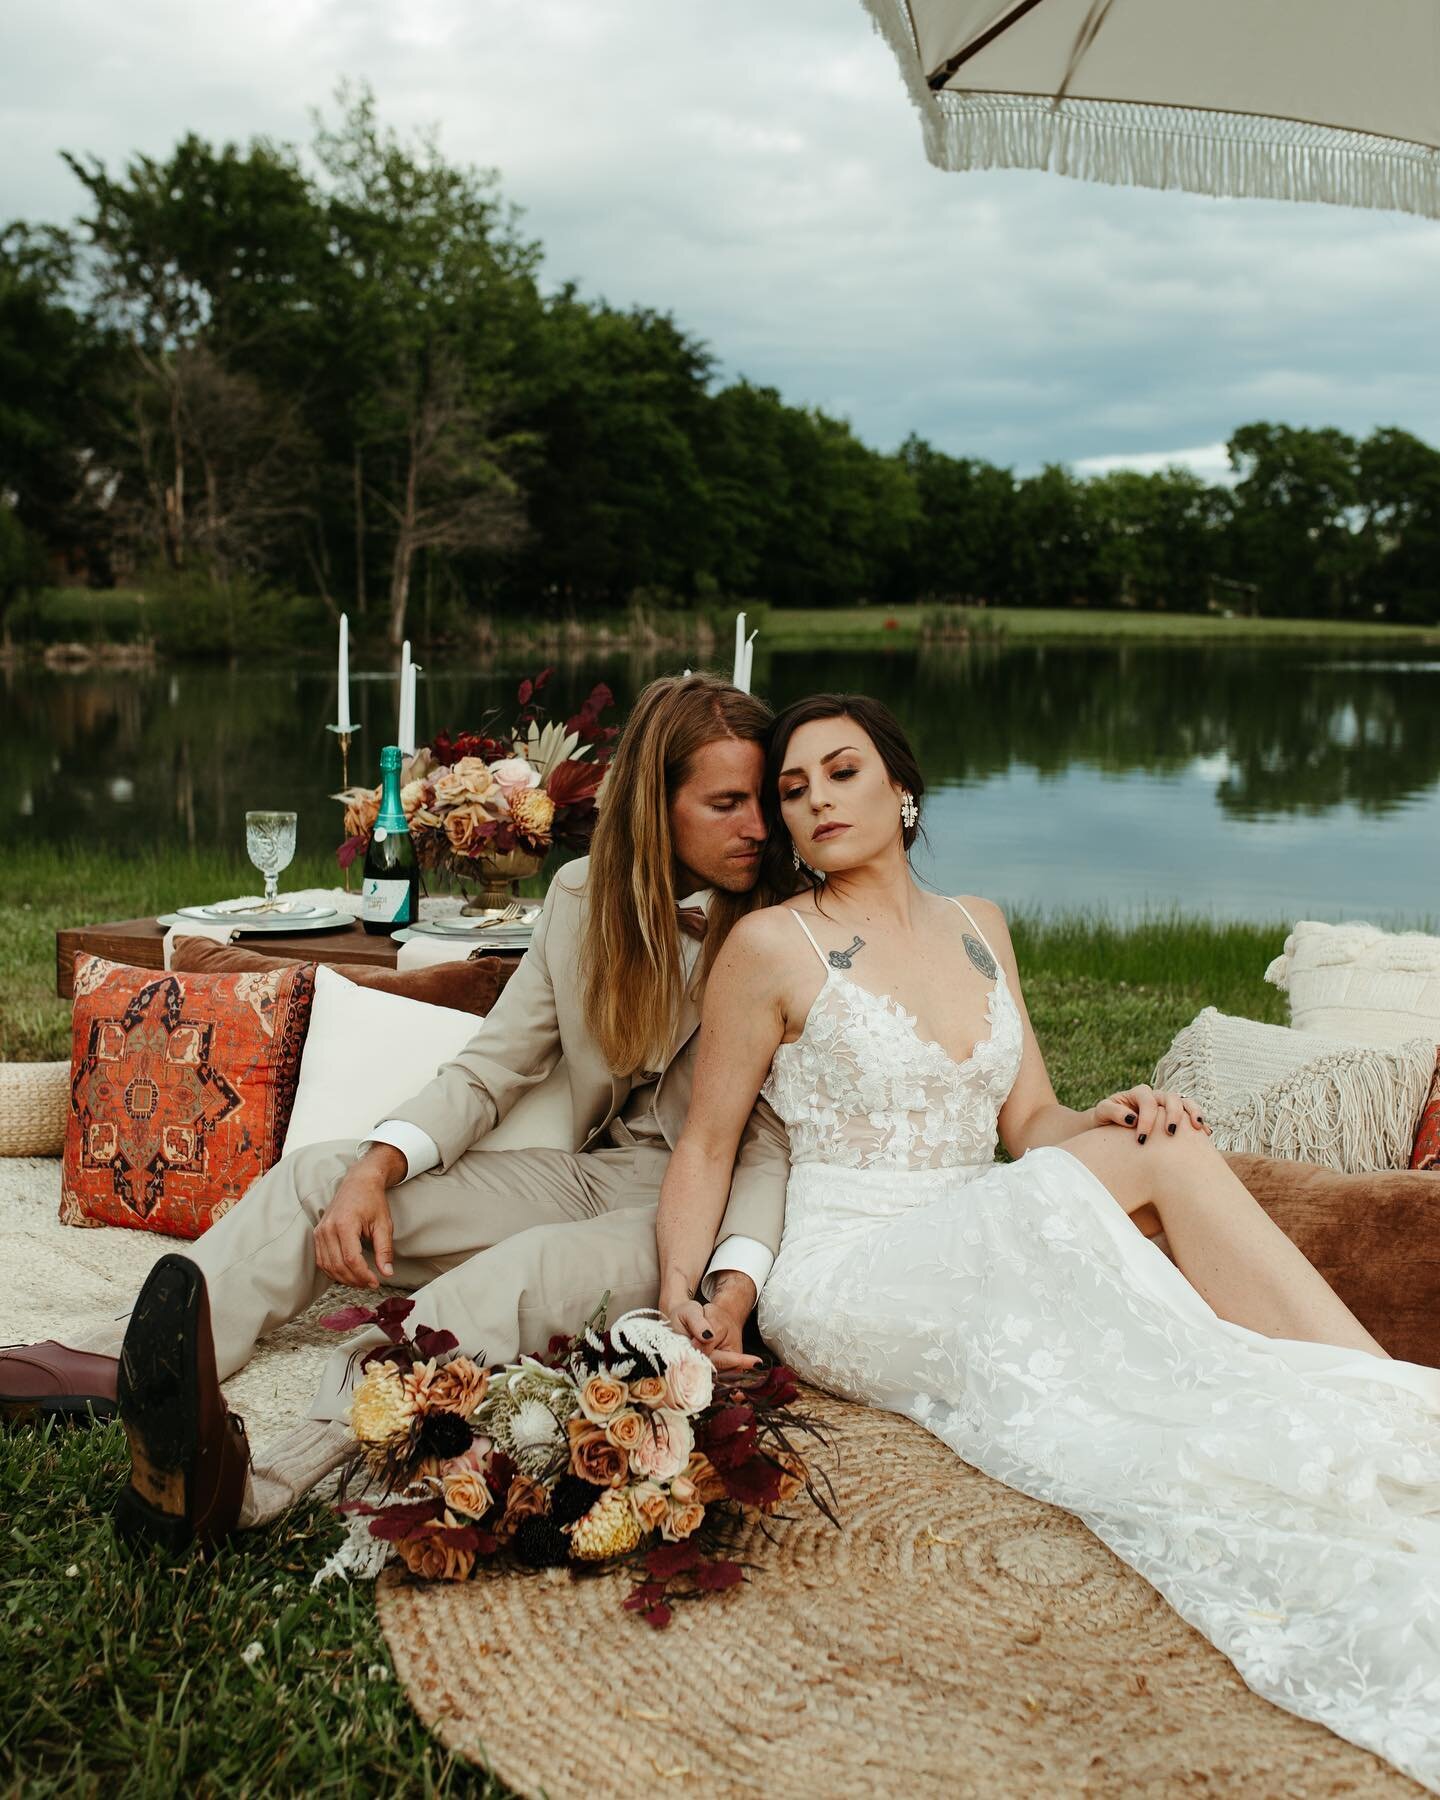 Just posted a really informative guide in my story about what your photographers want to tell you but don&rsquo;t. Go read. ❤️
VENUE: @gracevalleyfarm DRESS: @emerson.bridal 
TUX: @jmstreetmenswear MAKEUP: @hs_artistry 
HAIR: @kelseyreneegargus SET U